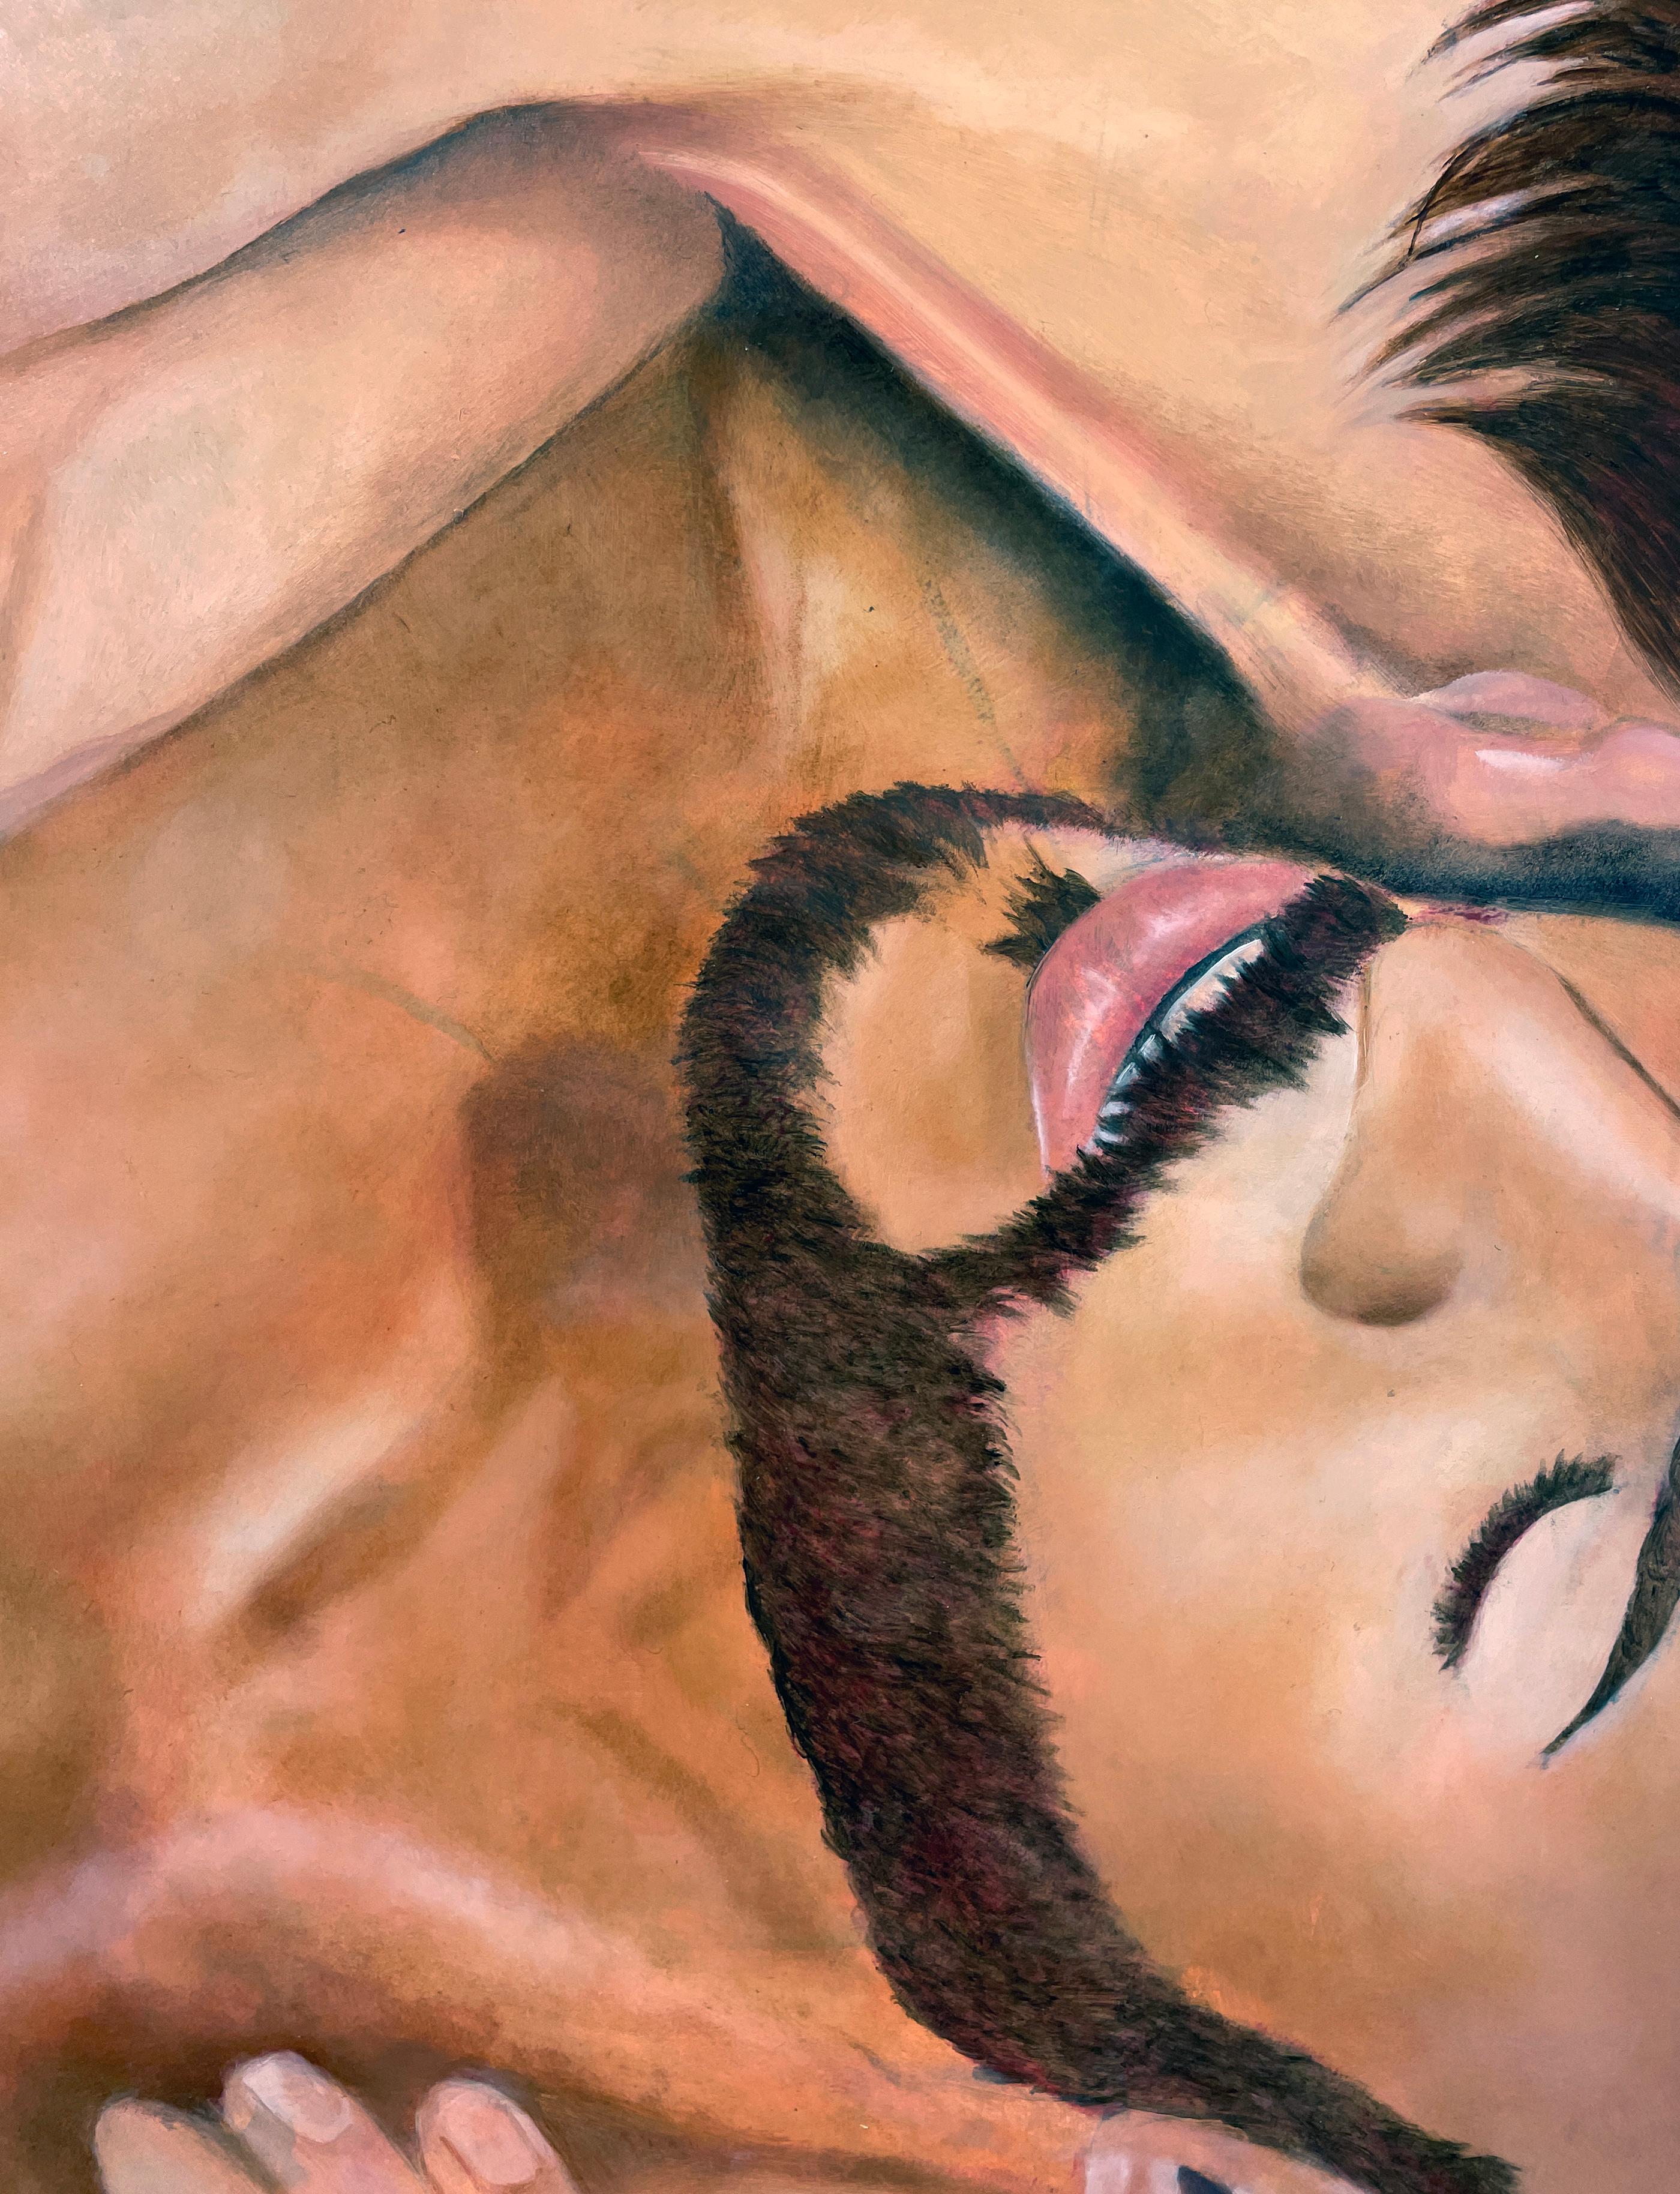 Their Whole Private Selves - Two Nude Bodies Entwined, Original Oil on Panel - Contemporary Painting by Rick Sindt